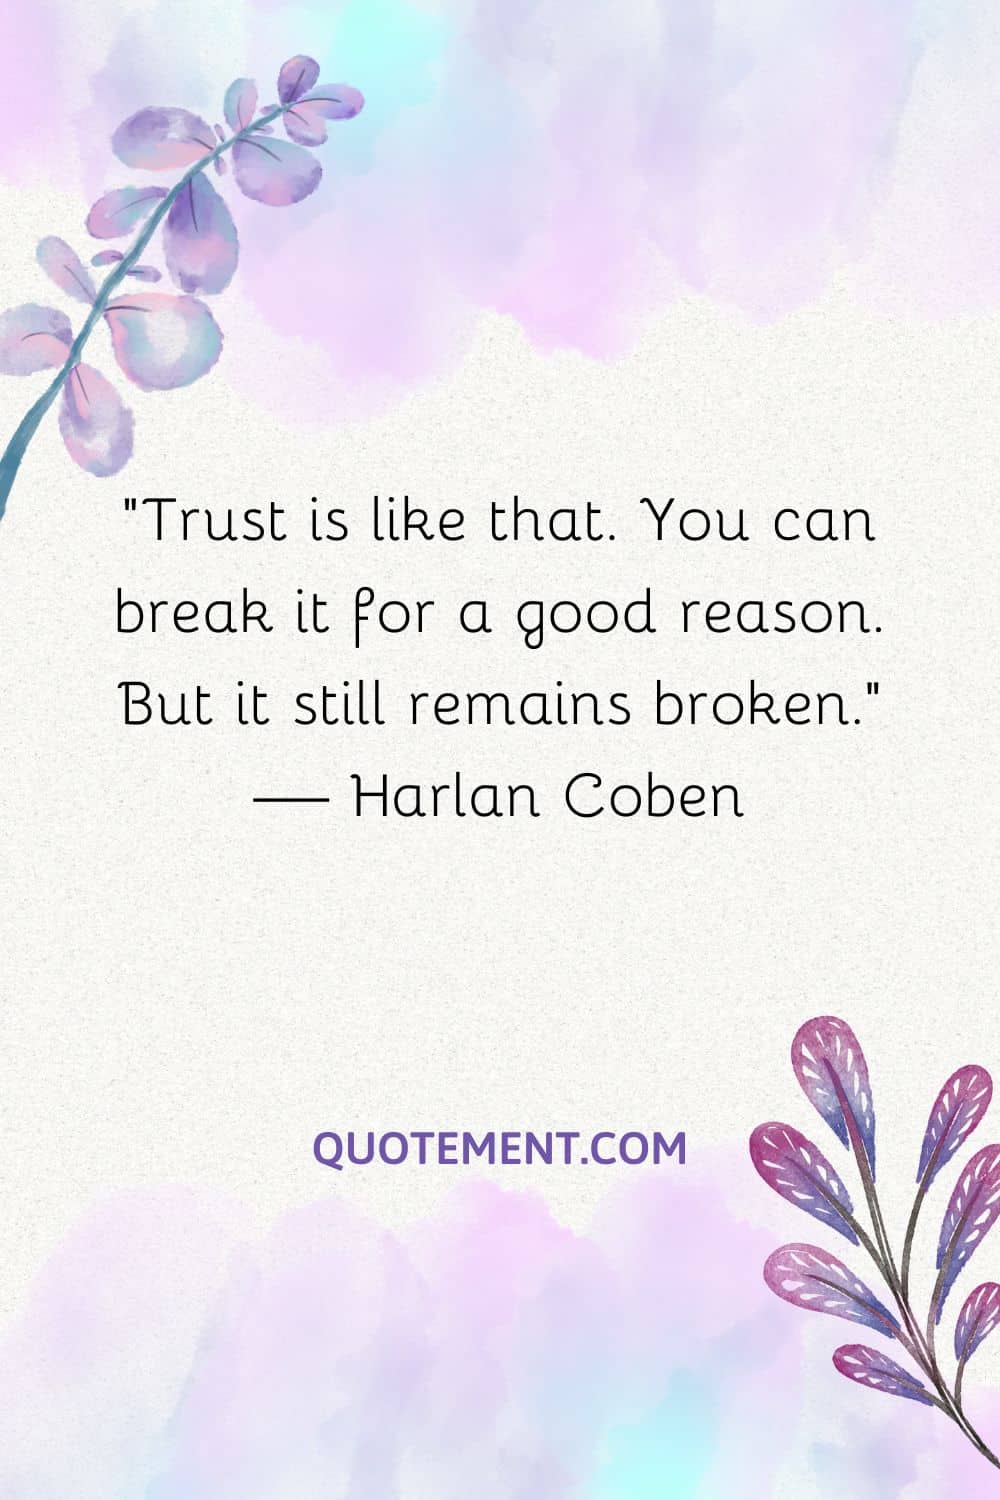 Trust is like that. You can break it for a good reason. But it still remains broken